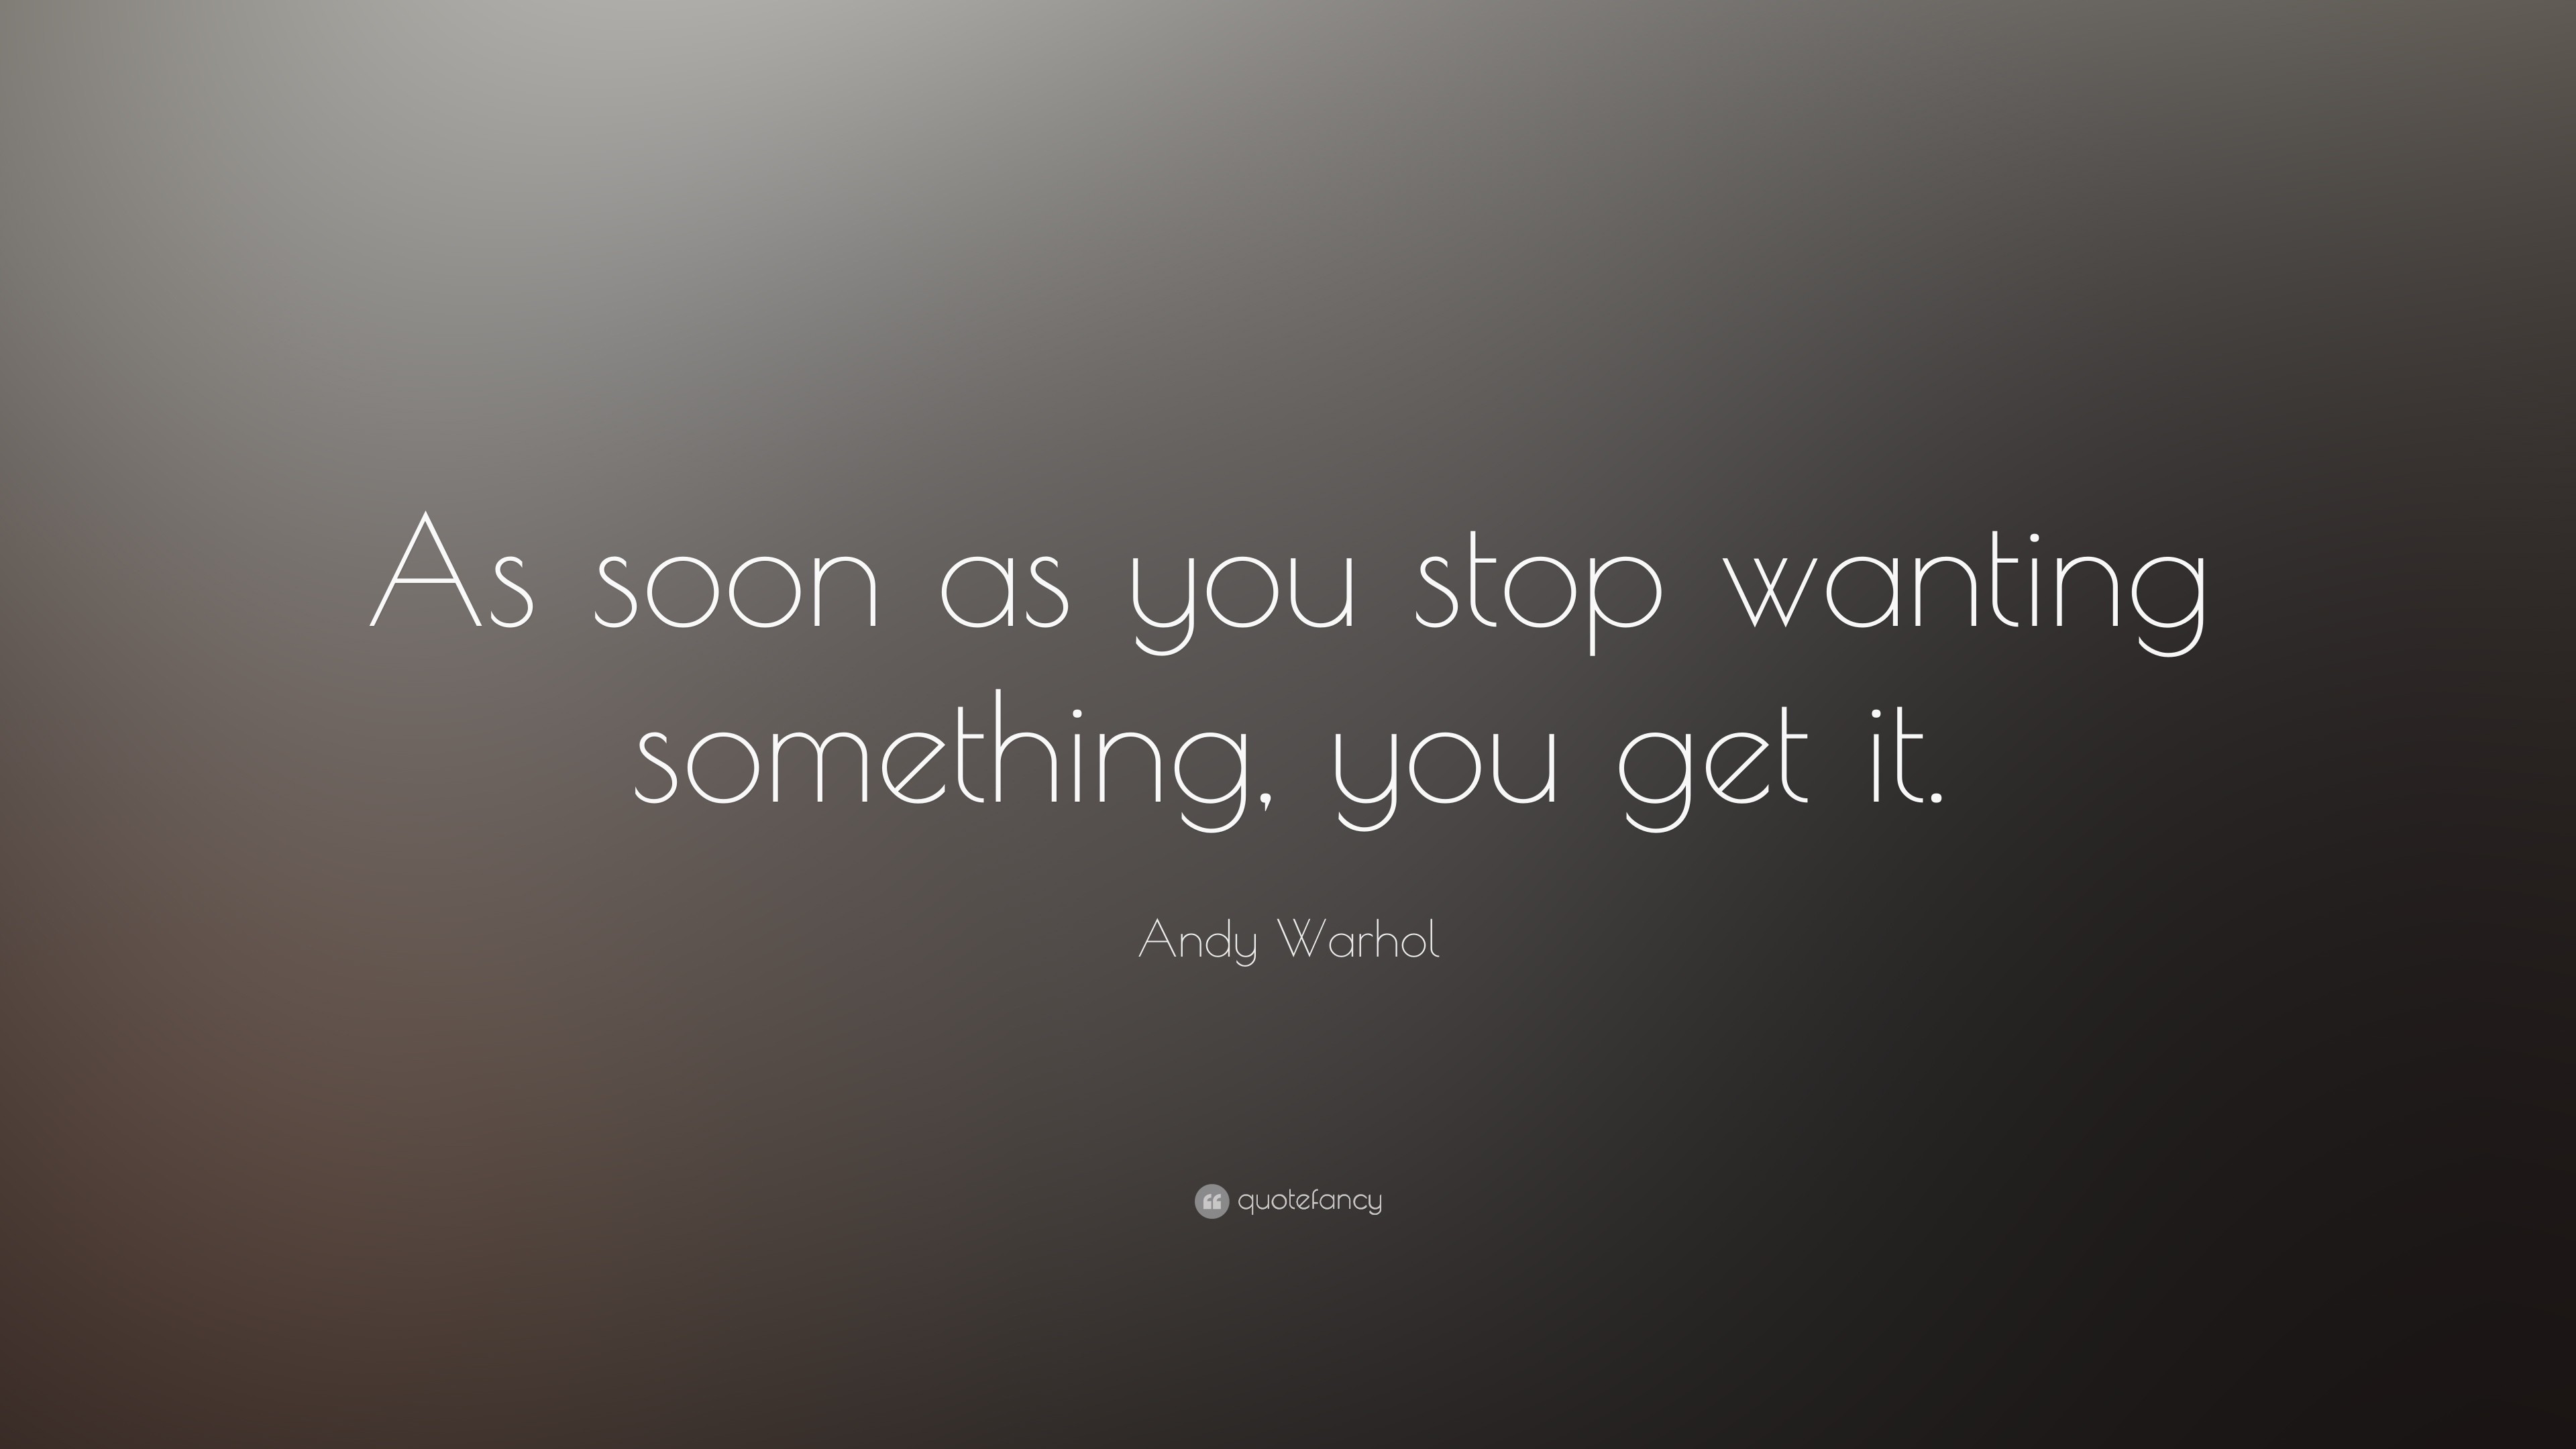 3840x2160 Andy Warhol Quote: “As soon as you stop wanting something, you get it